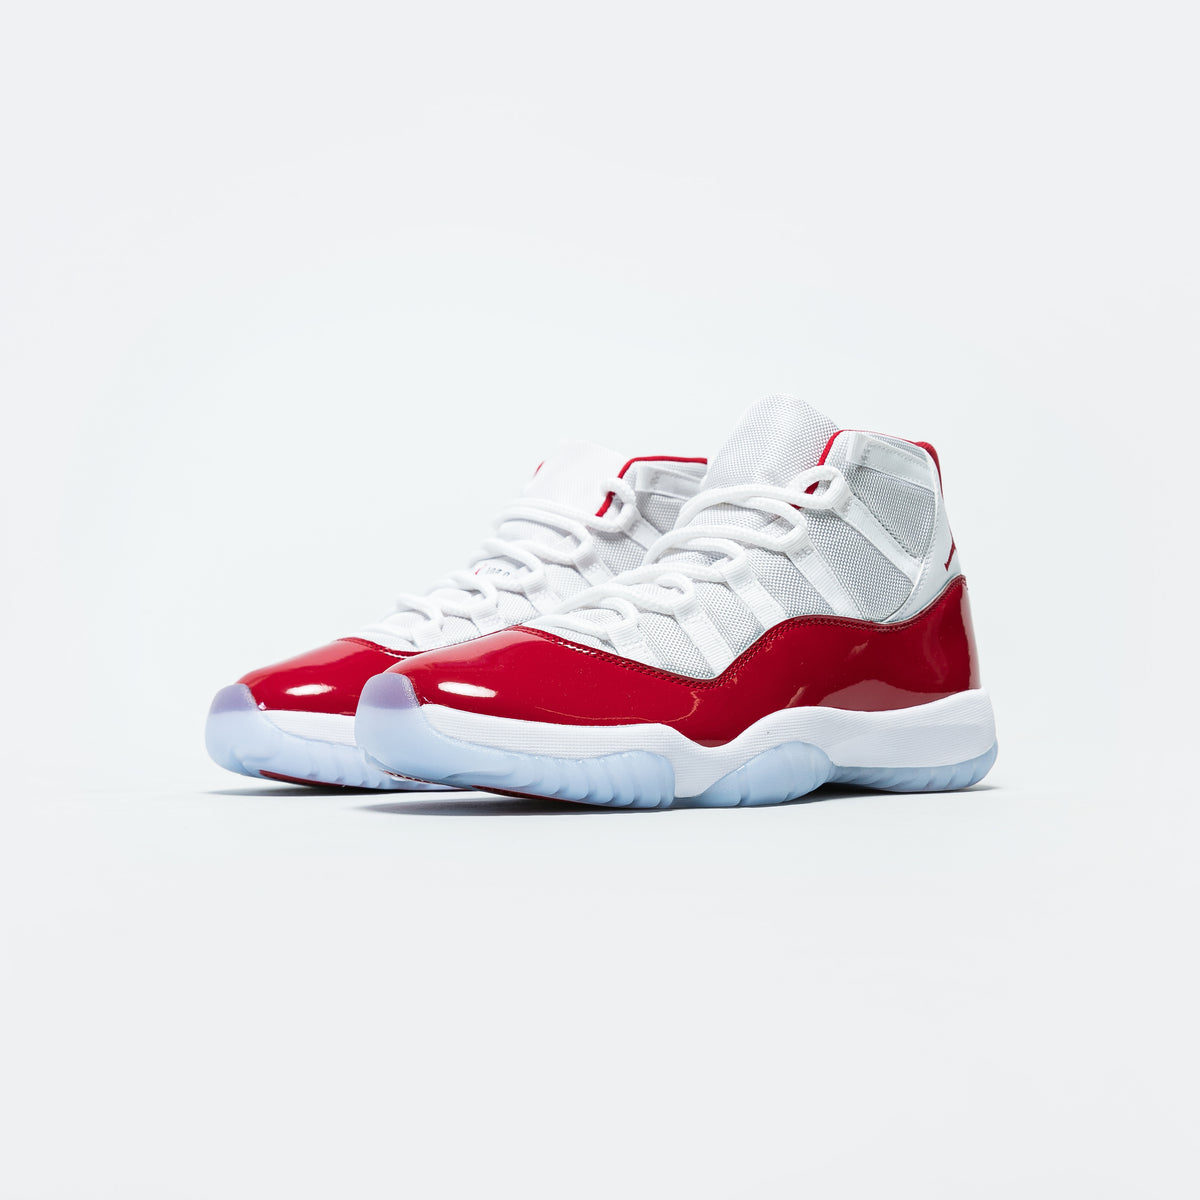 jordan 11 red and black and white